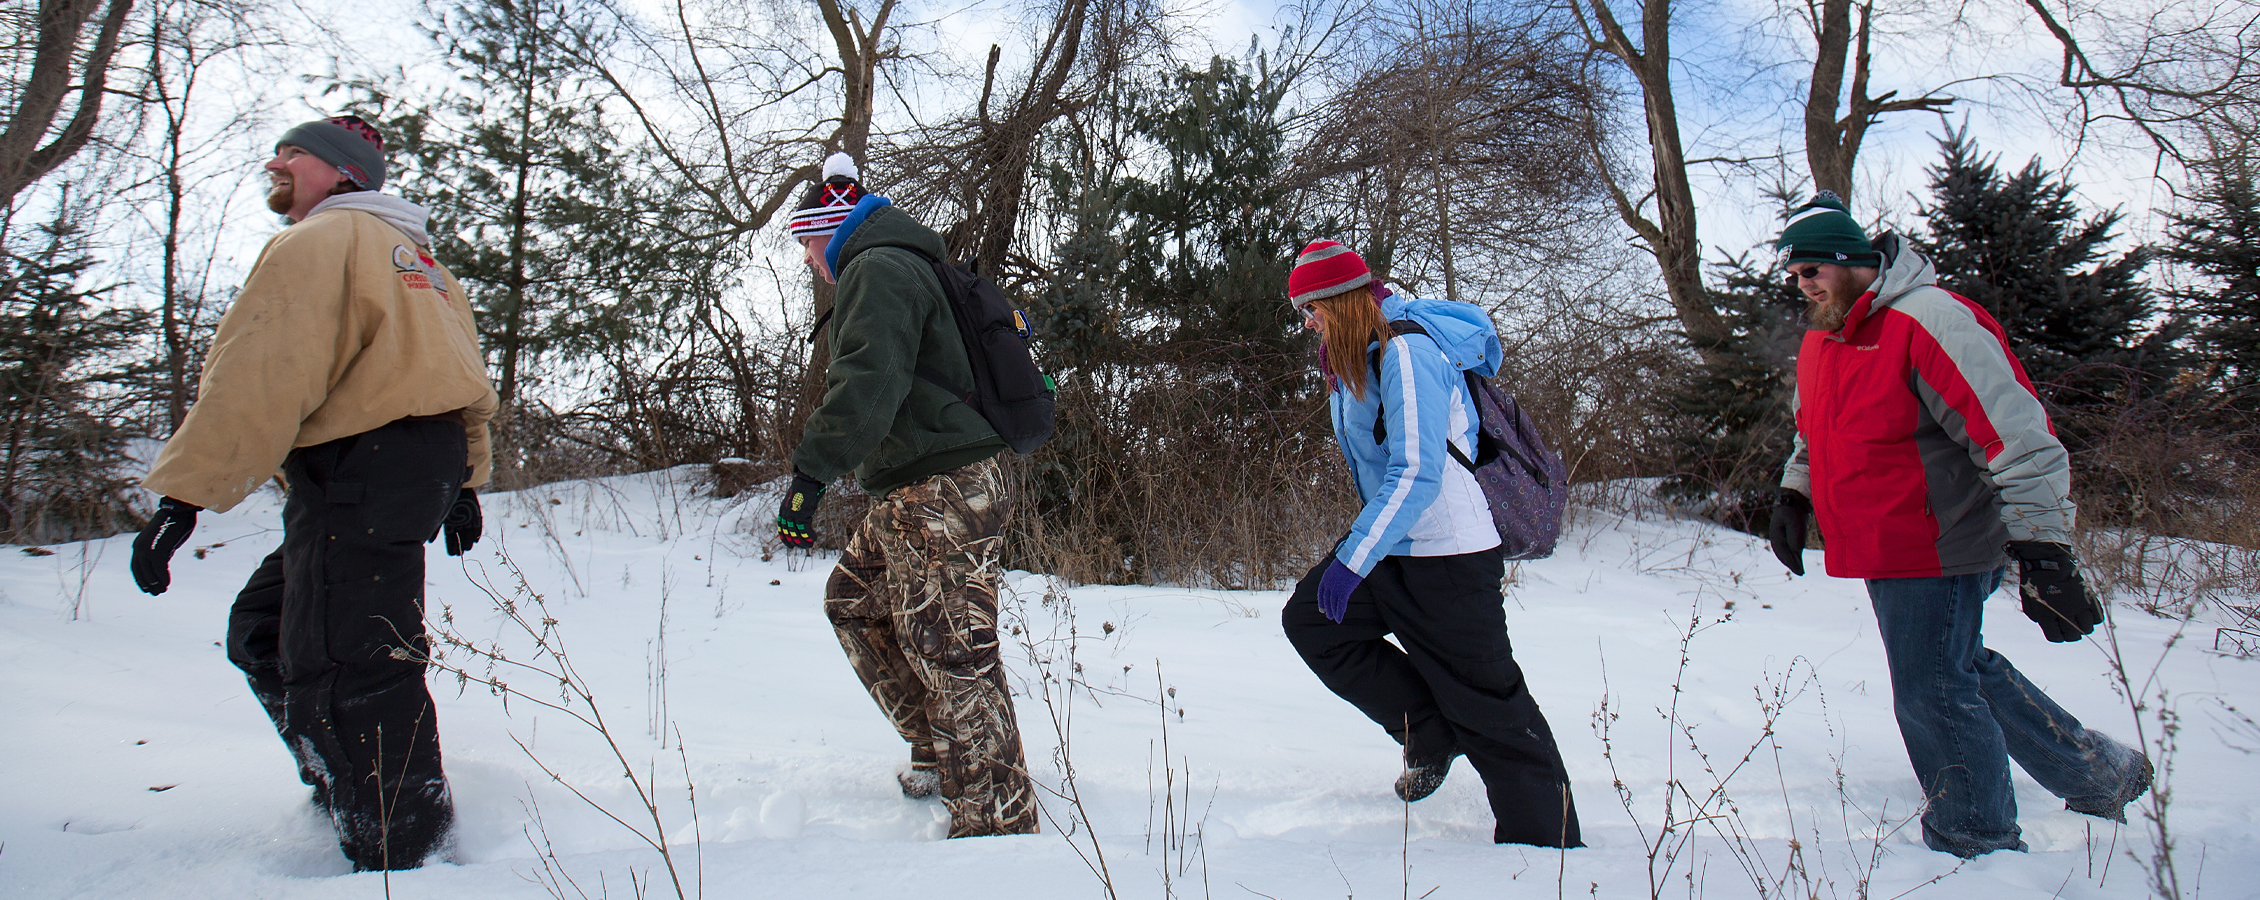 Four students walk through the snow in a wooded area.